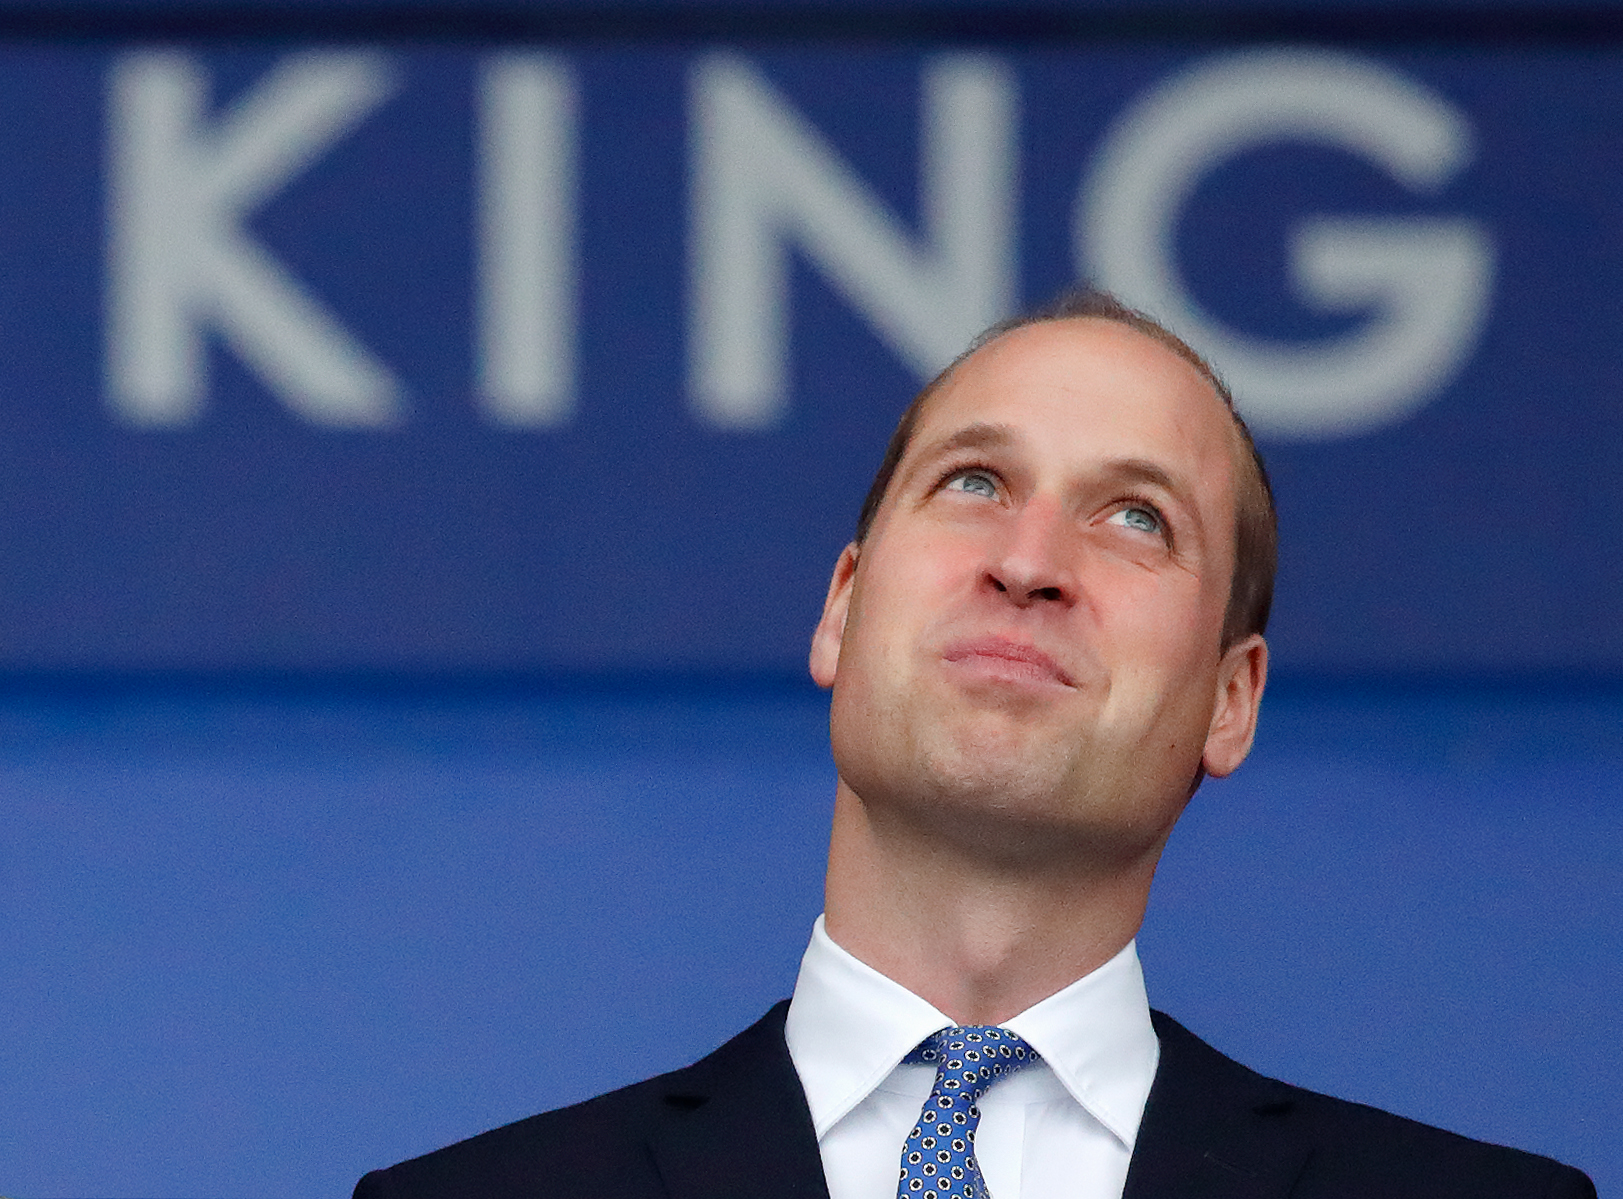  HRH Prince William, Duke of Cambridge visits Leicester City Football Club's King Power Stadium to pay tribute to those people killed, including club owner Vichai Srivaddhanaprabha, in the helicopter crash of October 27th.
Photo by Max Mumby, 28 Nove